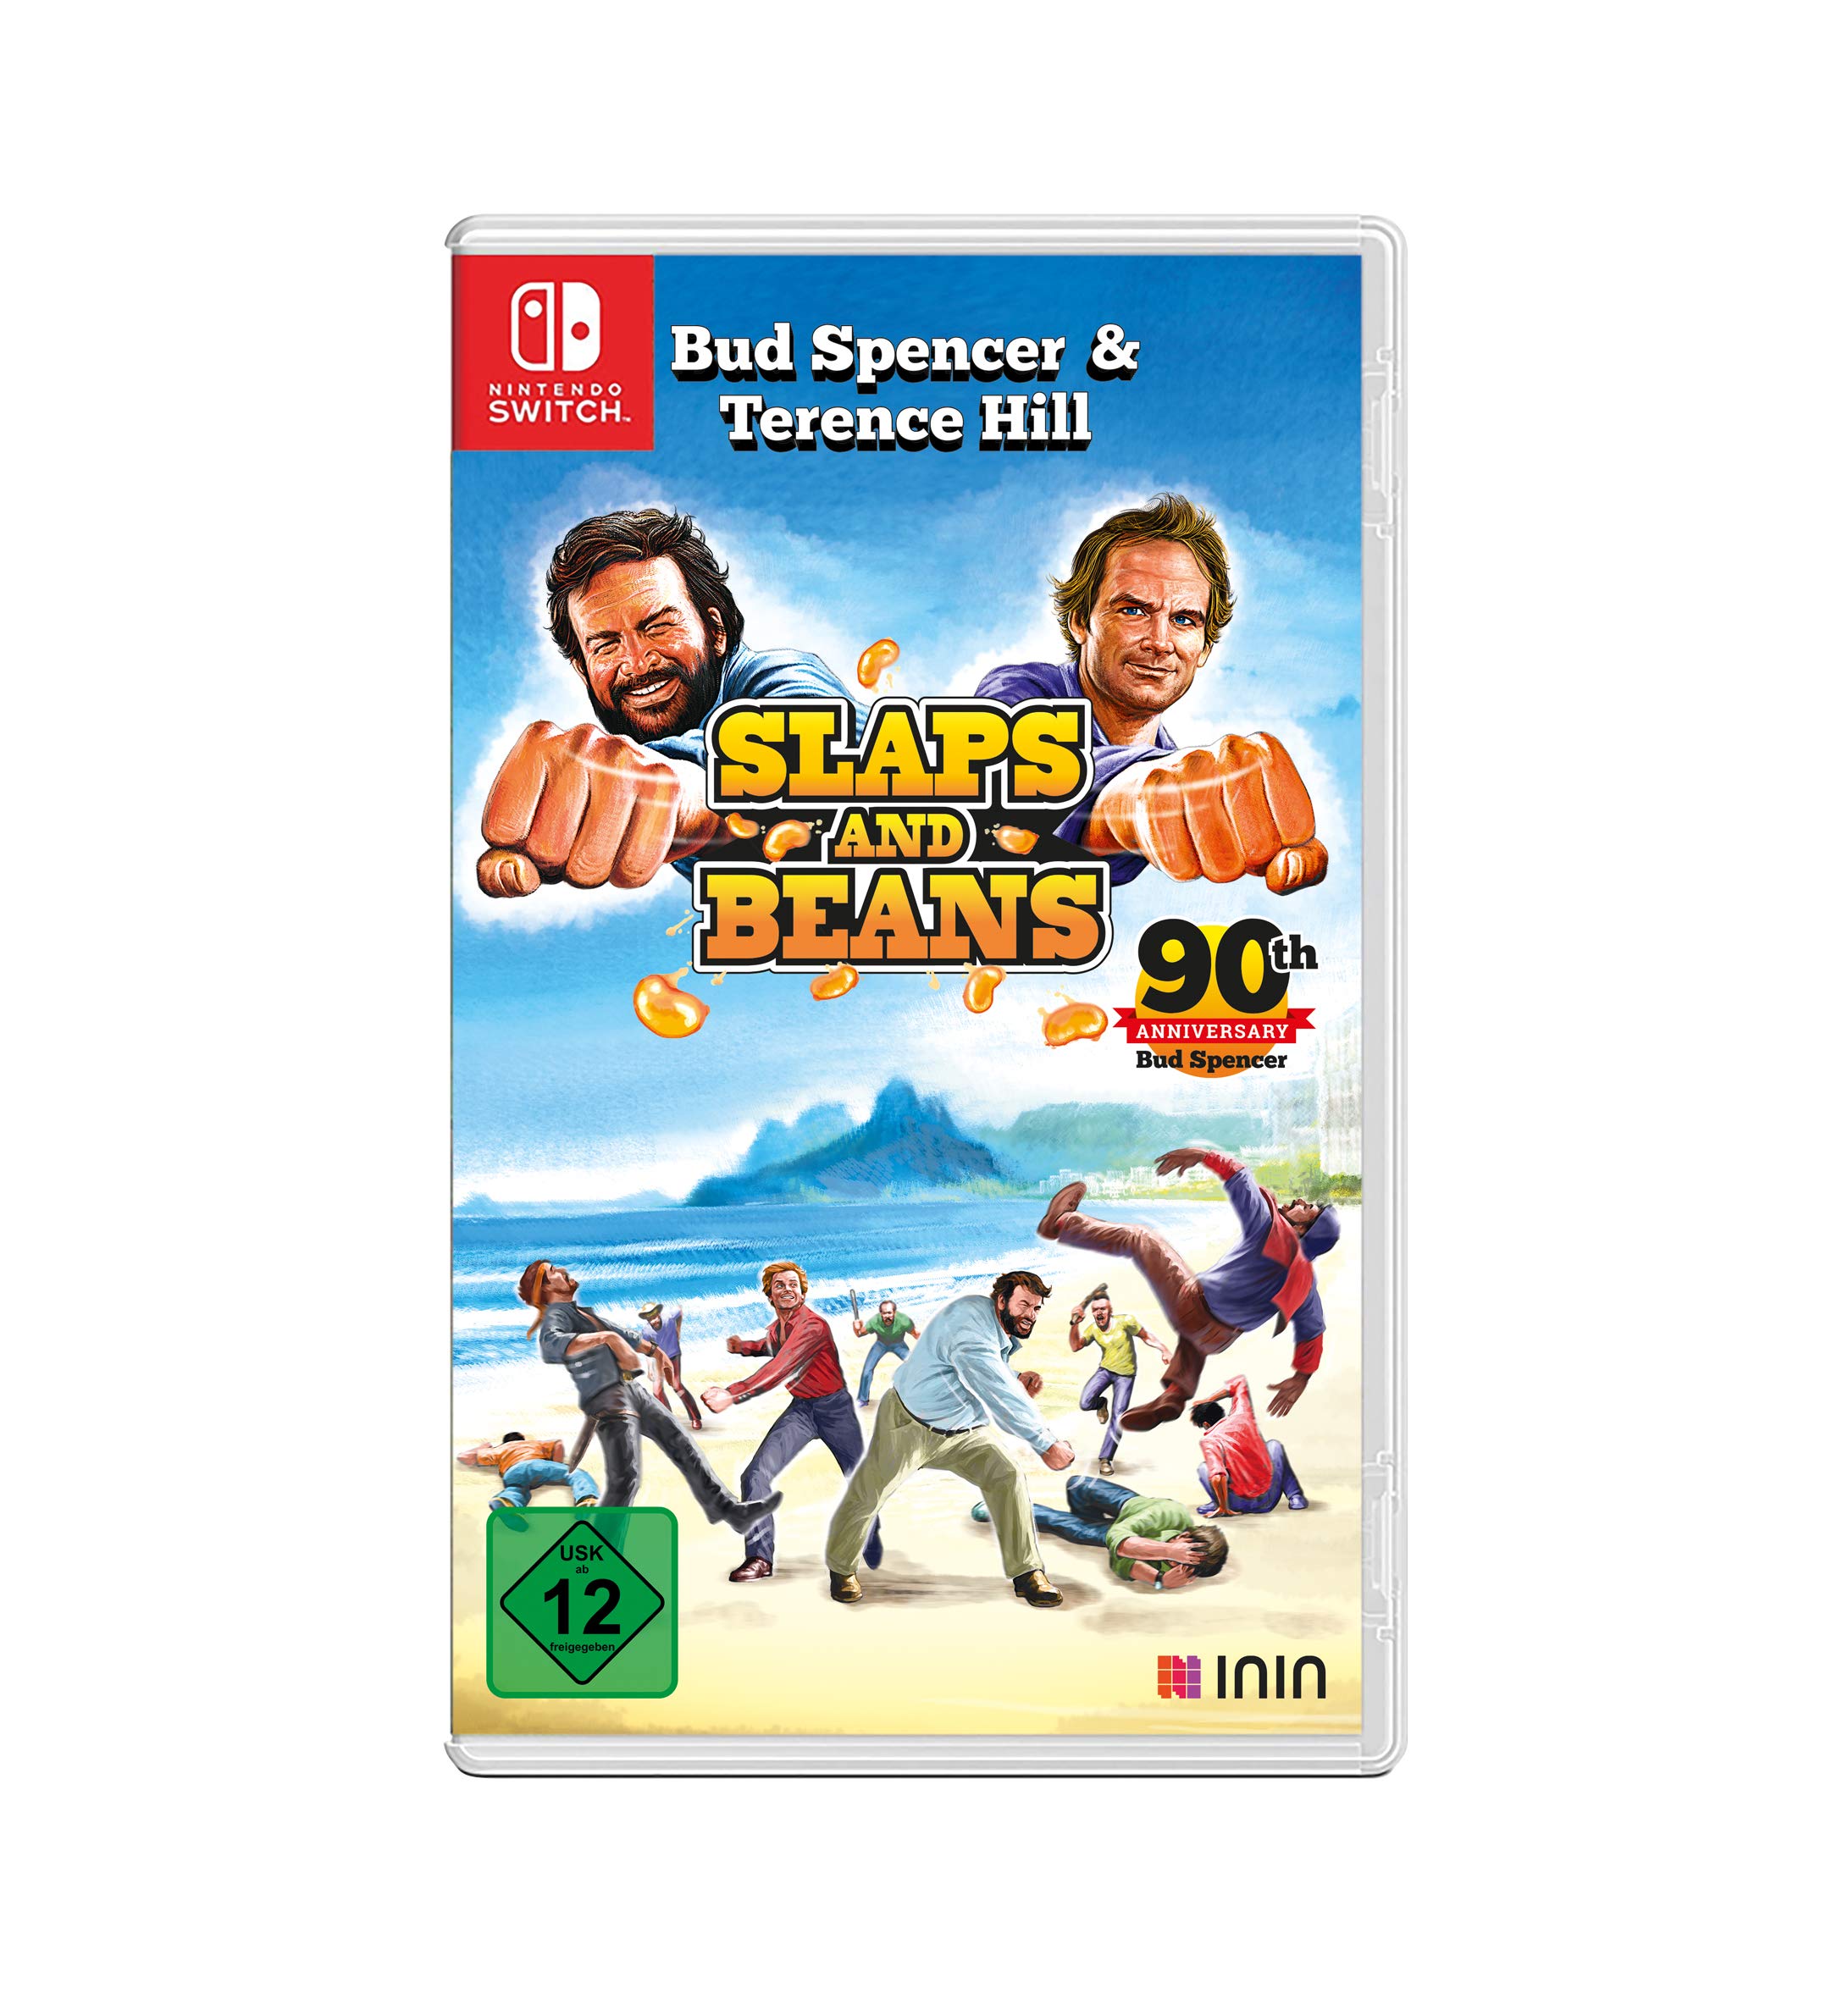 Bud Spencer & Terence Hill Slaps and Beans. Anniversary Edition (Nintendo Switch): 4260558699972: Books